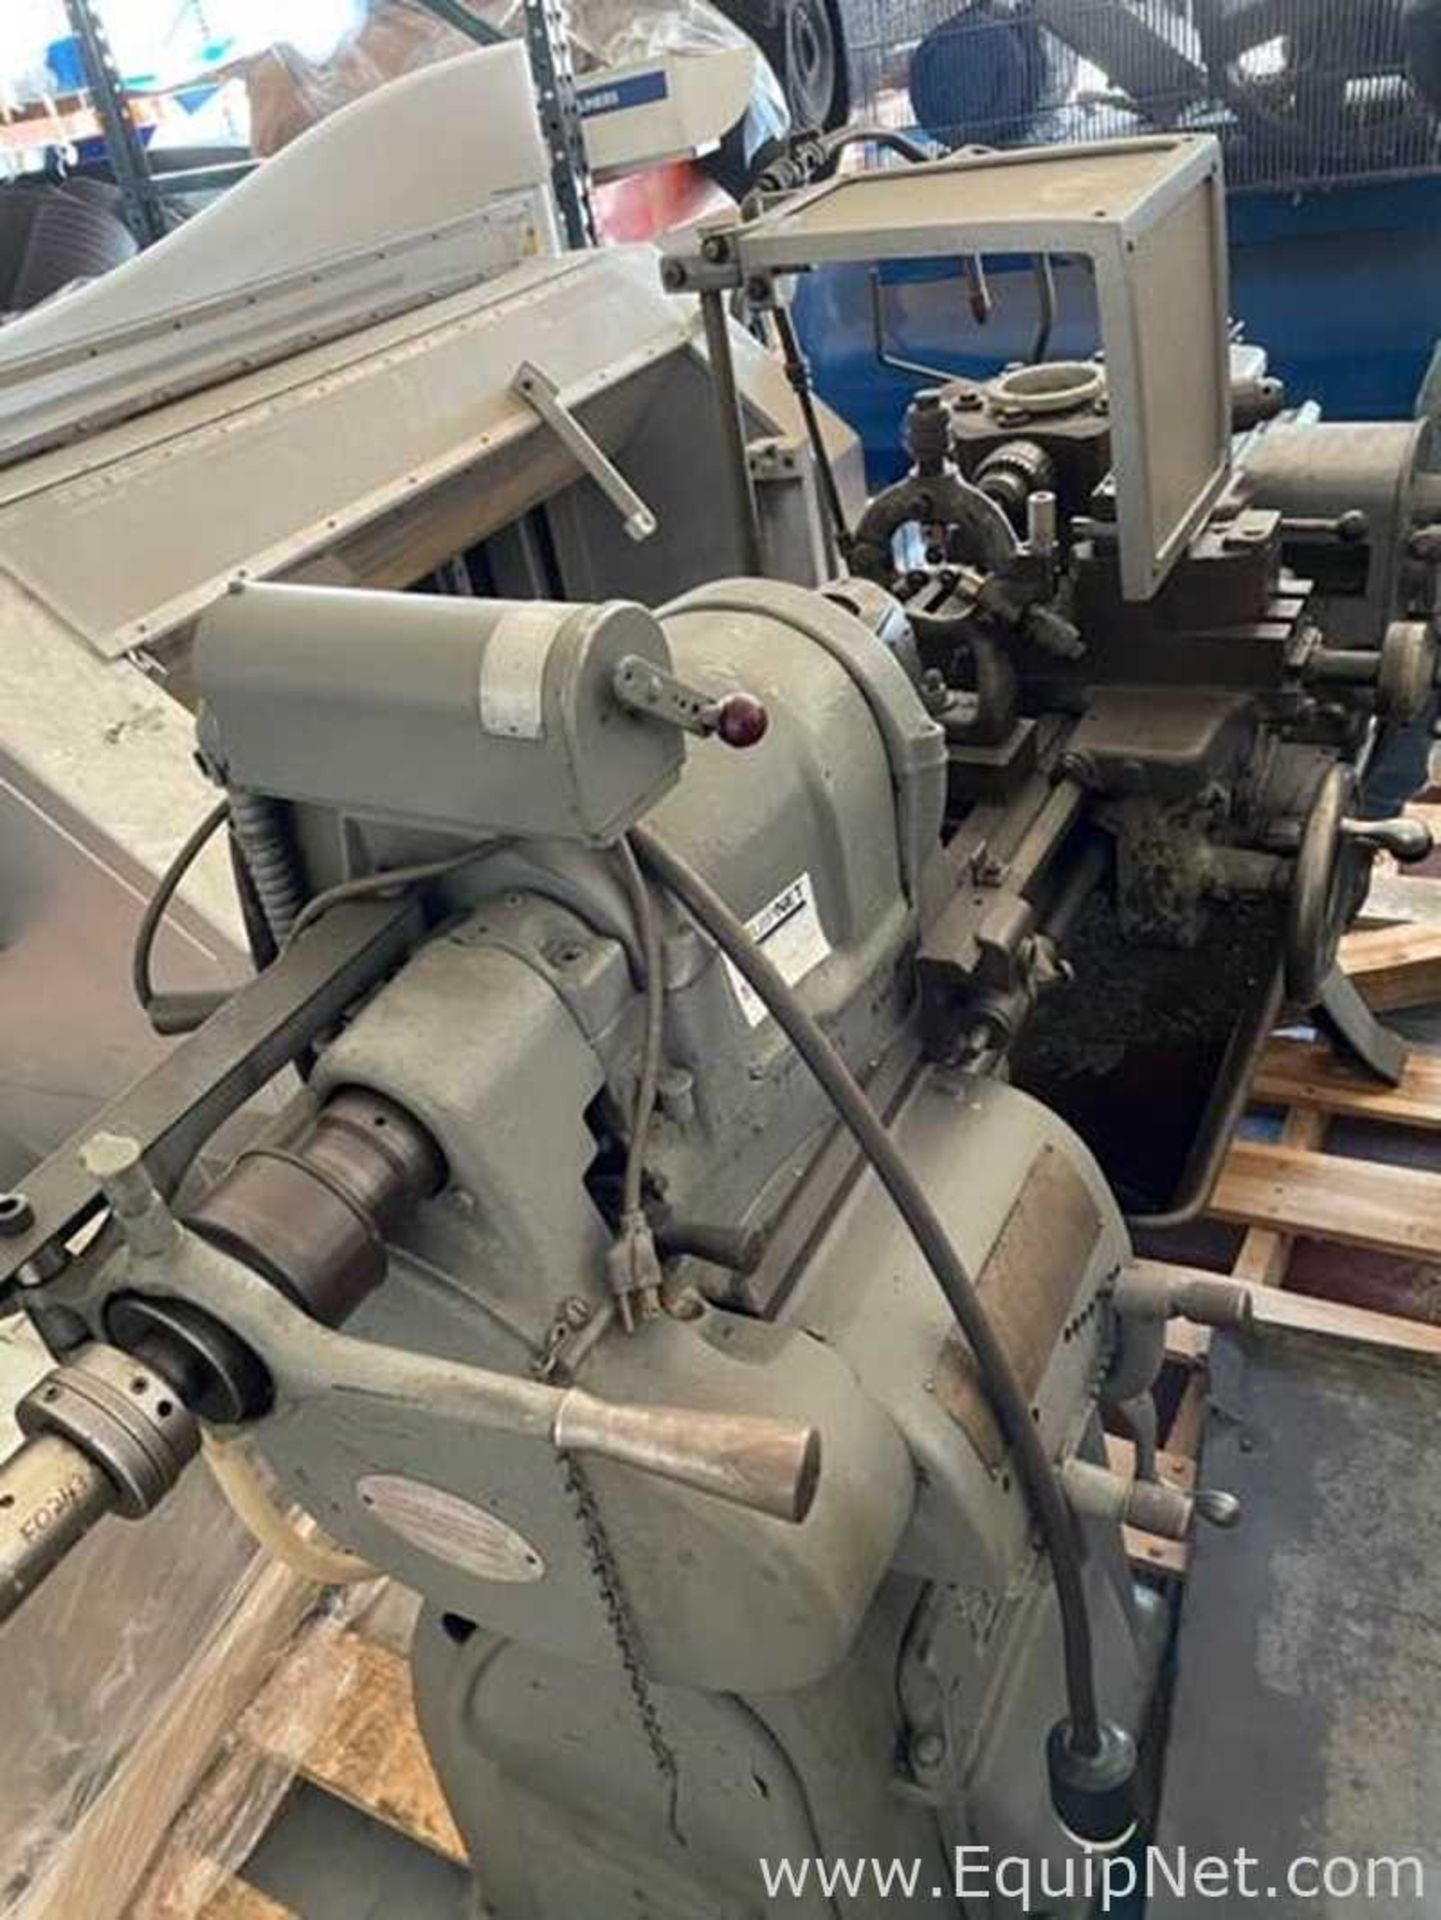 SOUTHBEND LATHE Turret chucks Collet Rack Steady Rest - Image 5 of 6